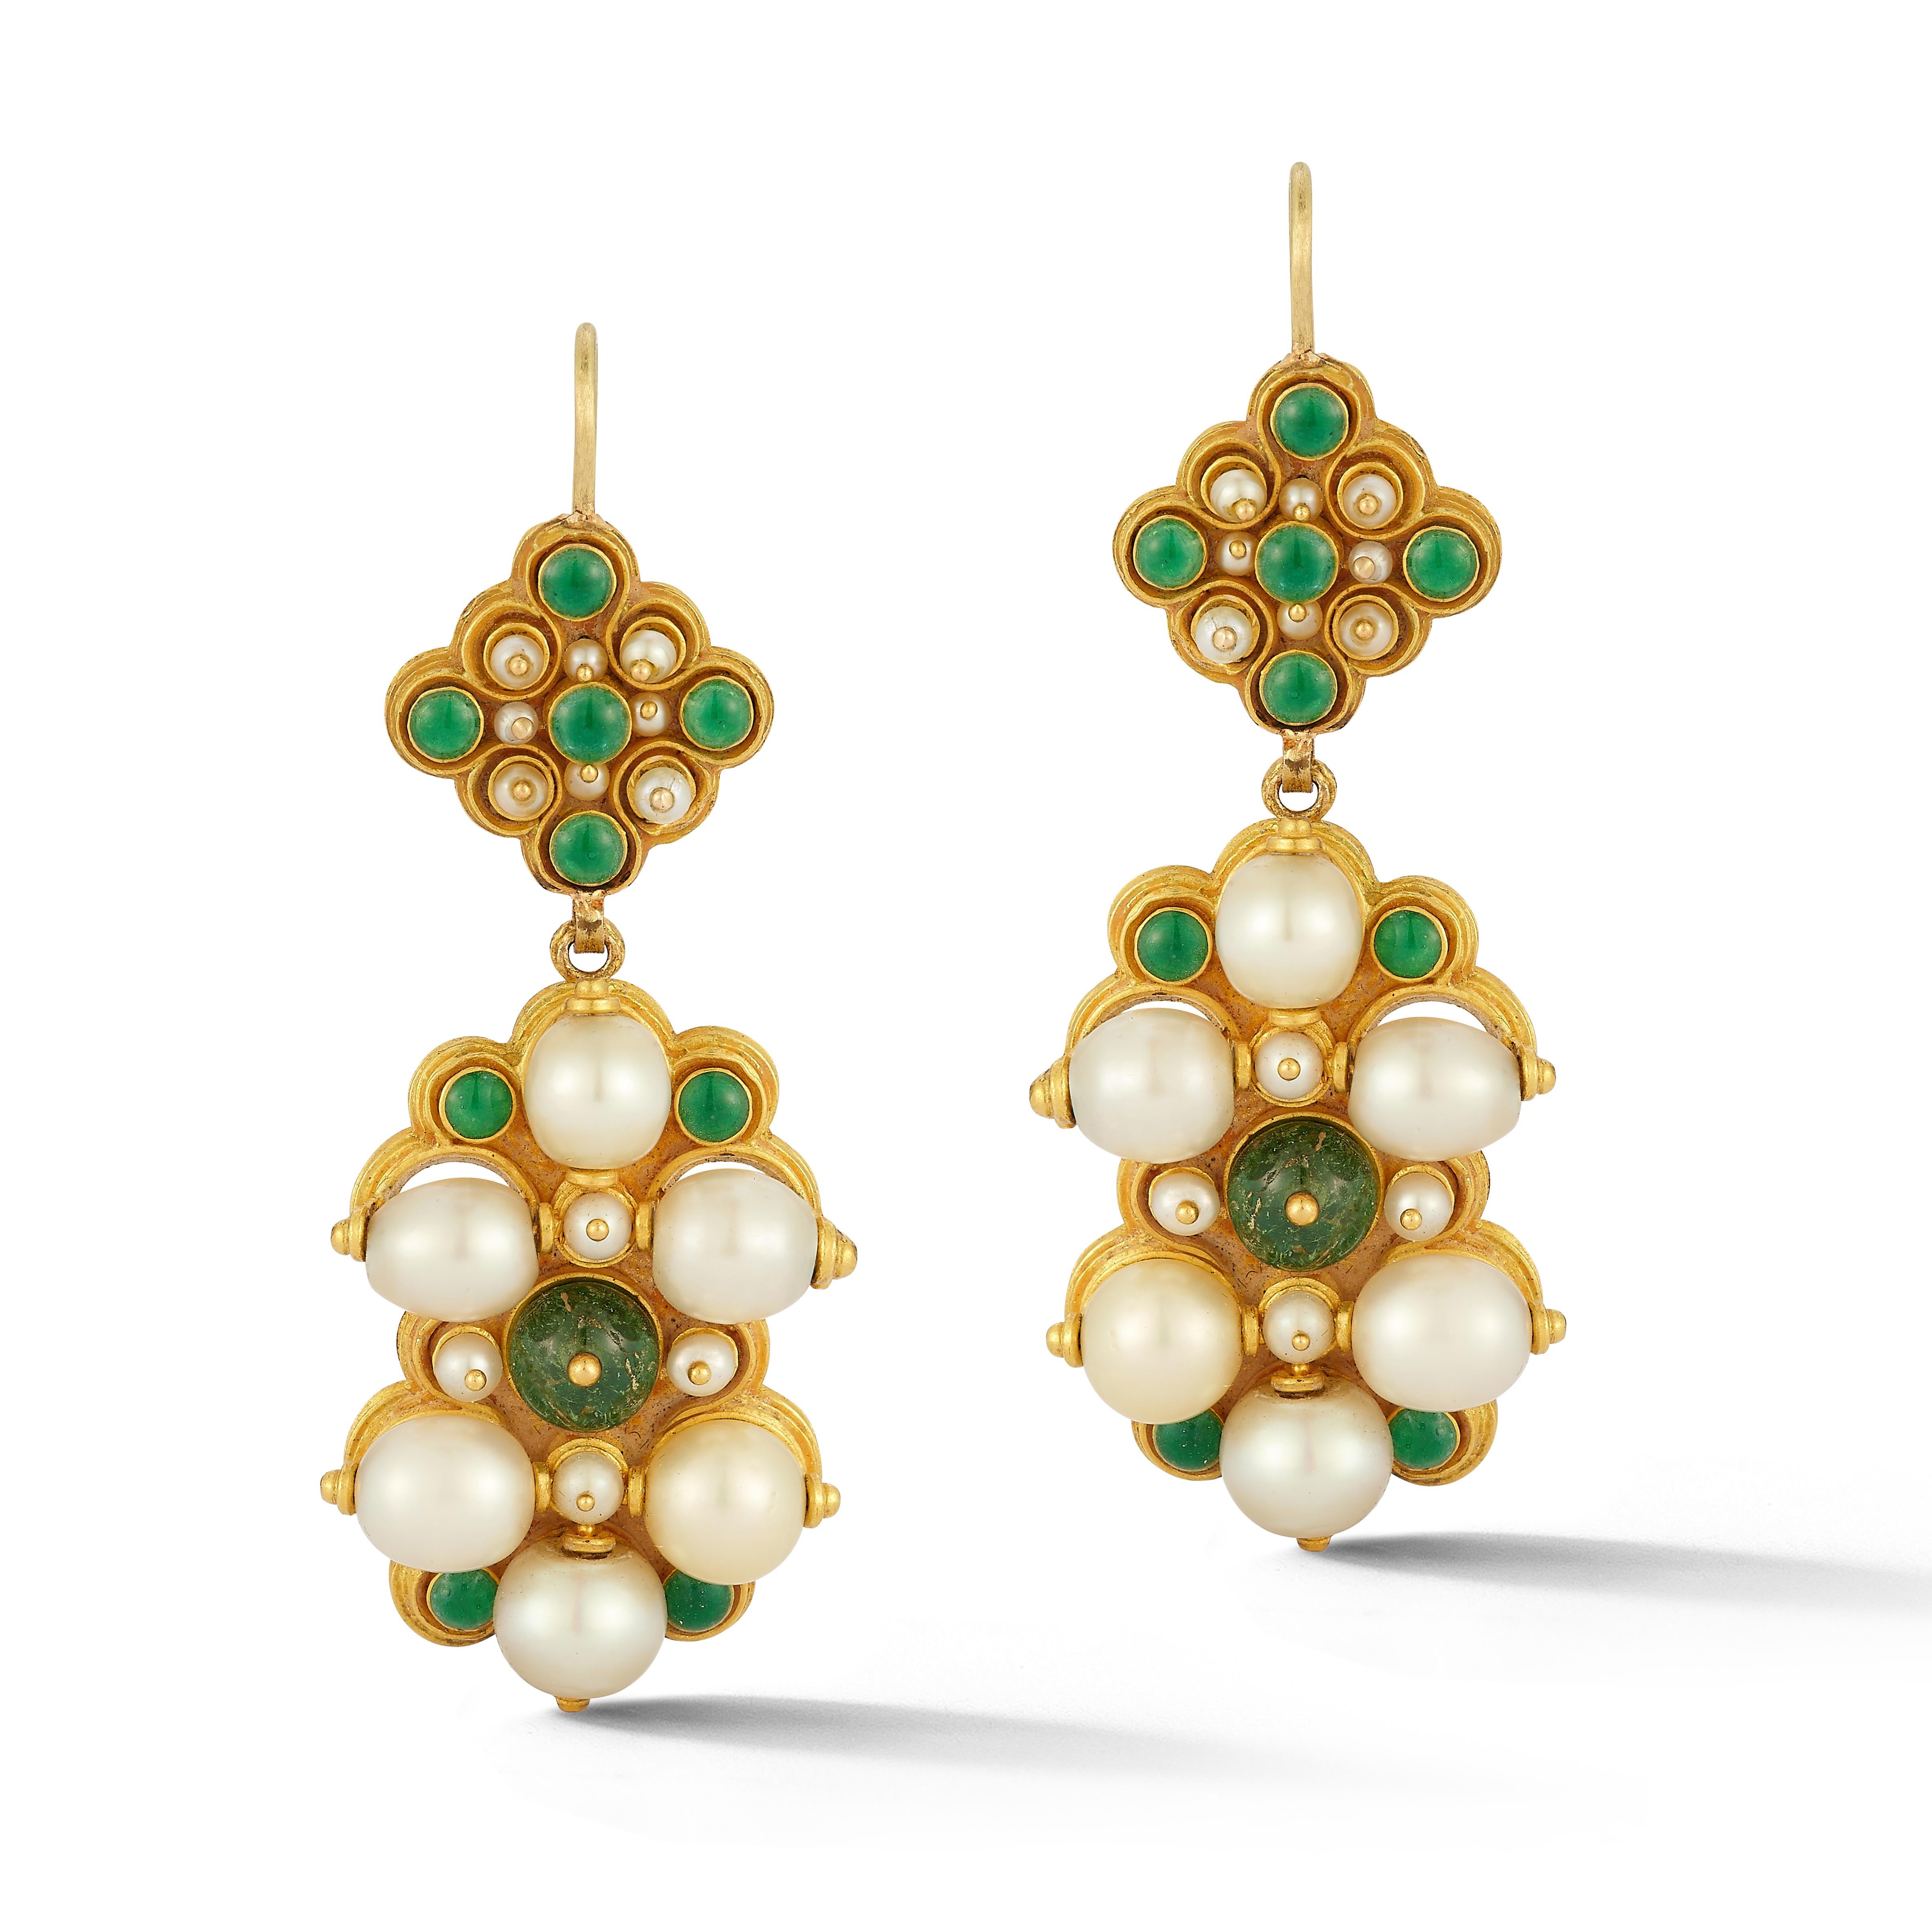 Antique Emerald Pearl & Enamel Earrings

Circa 1907

A pair of antique enamel earrings consisting of pearls and emeralds set in gold

Measurements: 2.25